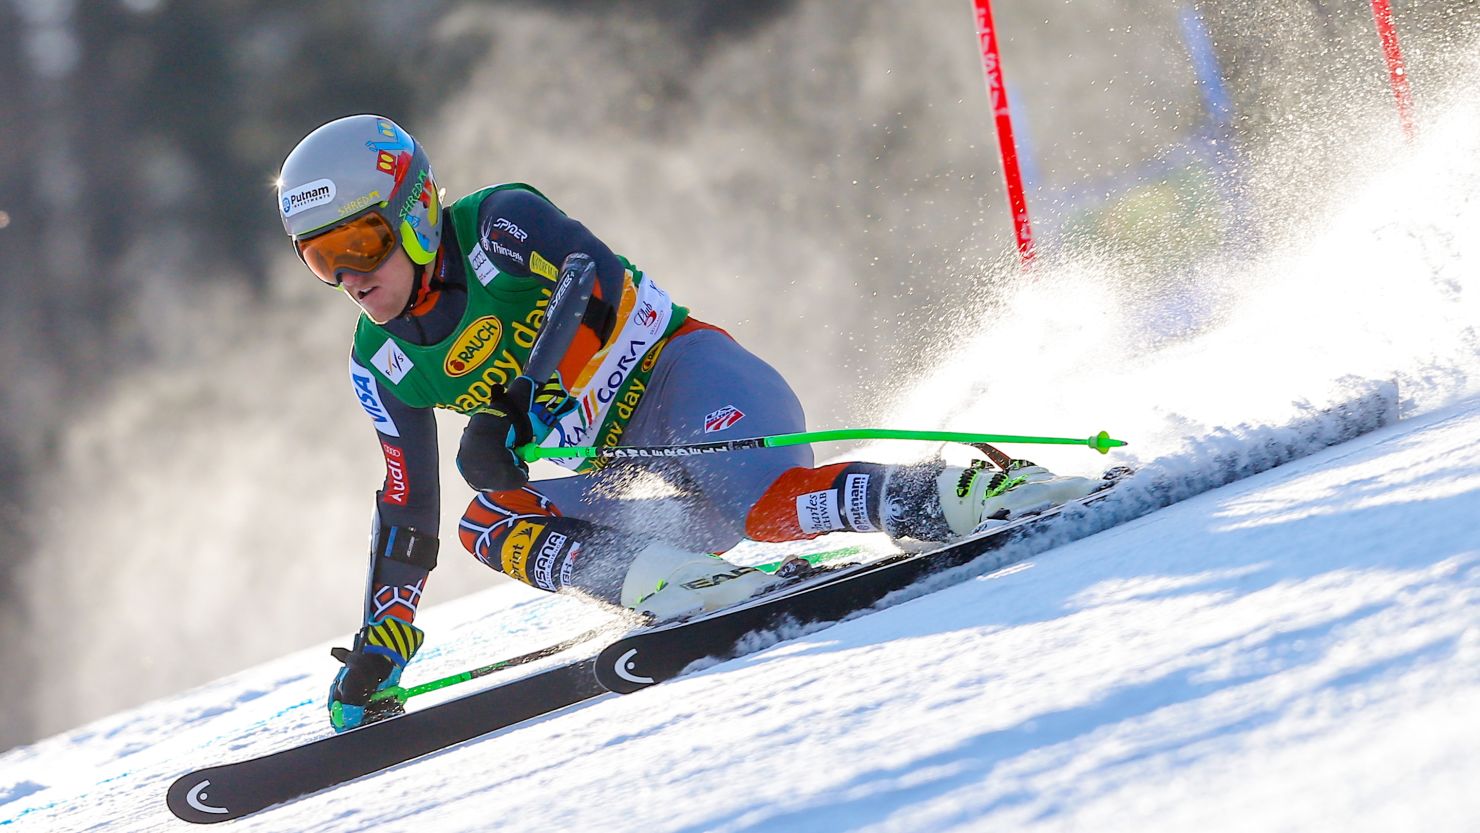 Olympic champion Ted Ligety recorded the sixth victory of his career at Kranjska Gora.